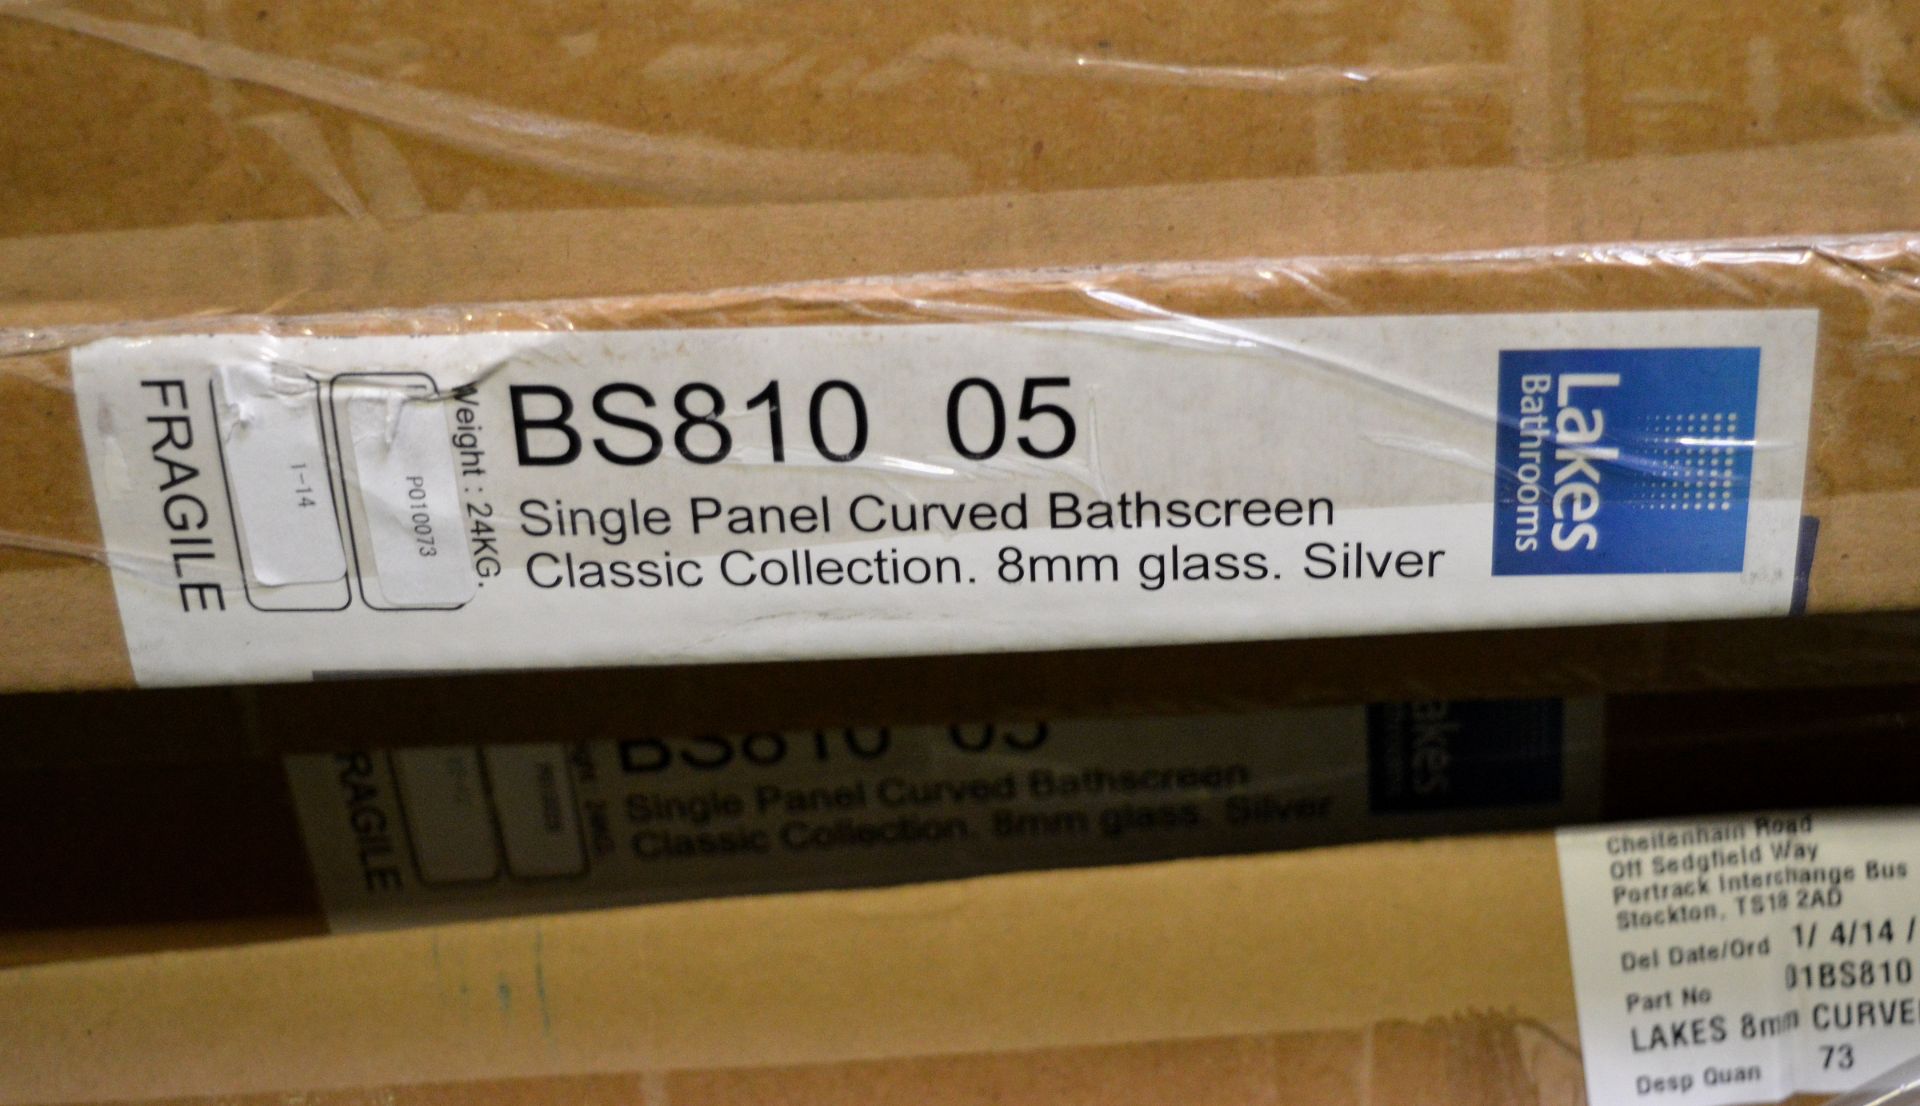 10x ALLCLEAR Single Panel Curved Bathscreens - 8mm Glass Silver - Image 4 of 4